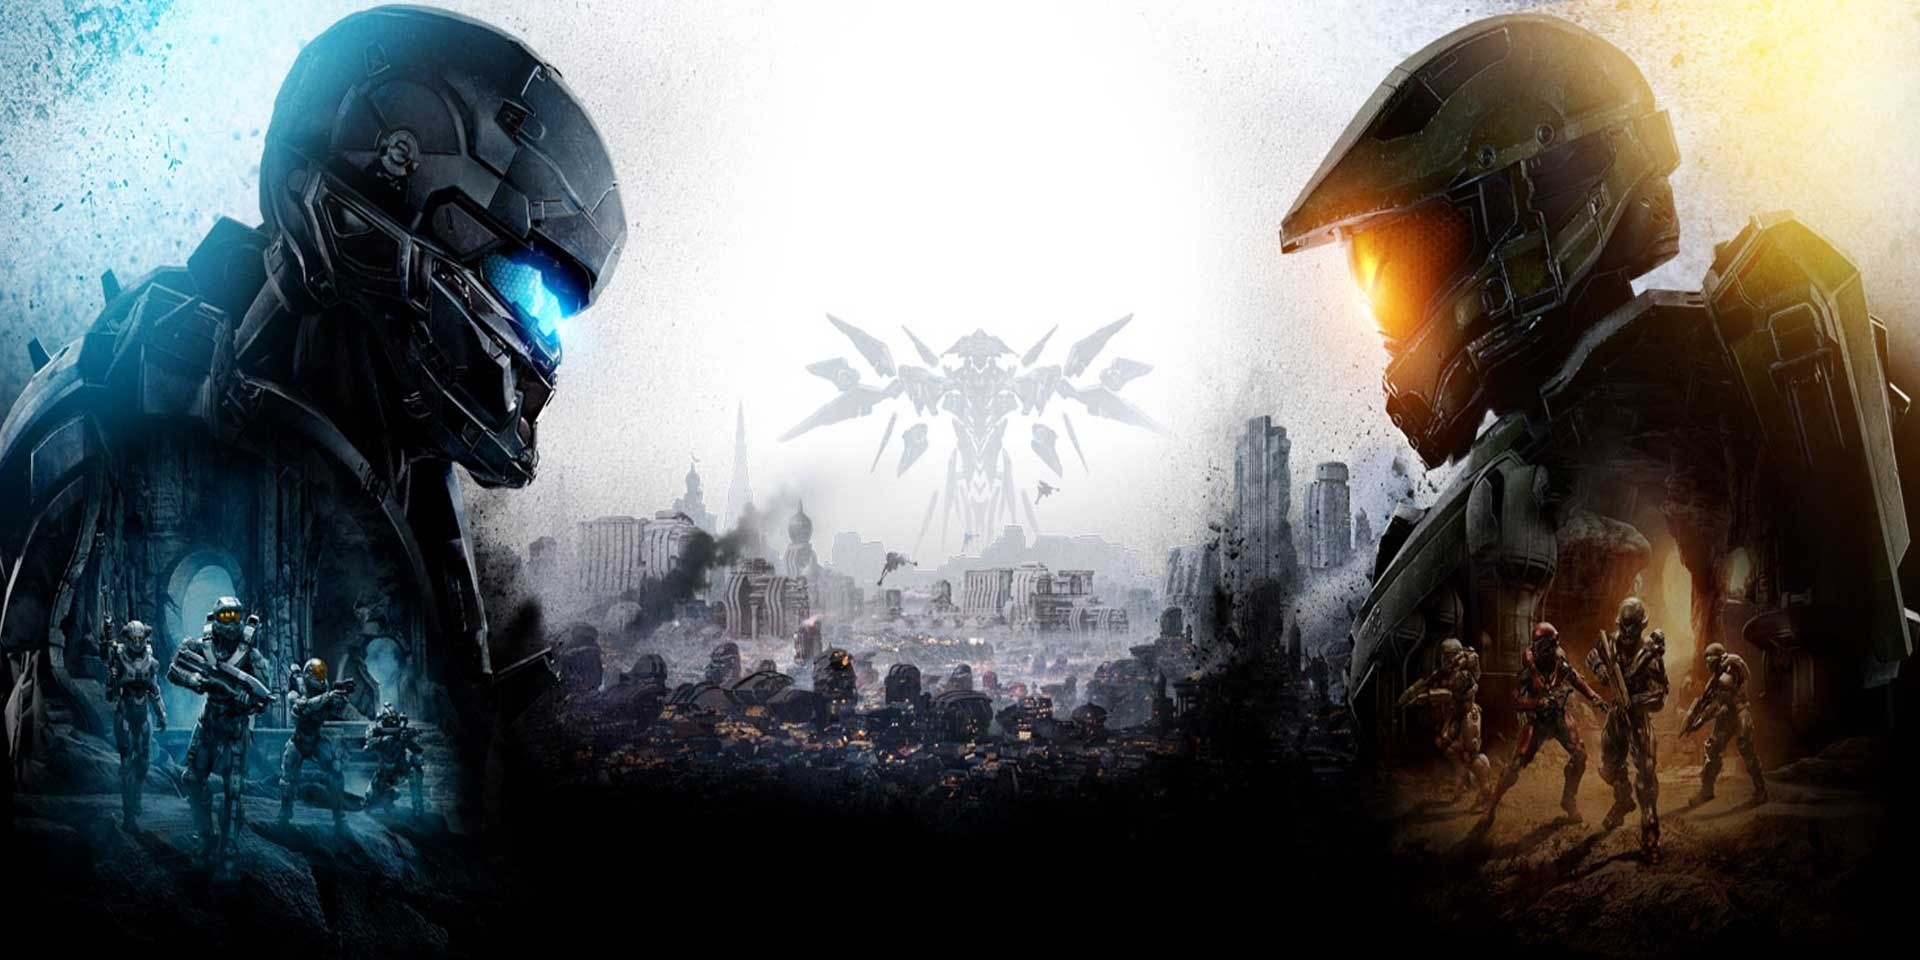 Halo 5 Guardians cover image of Locke versus Master Chief